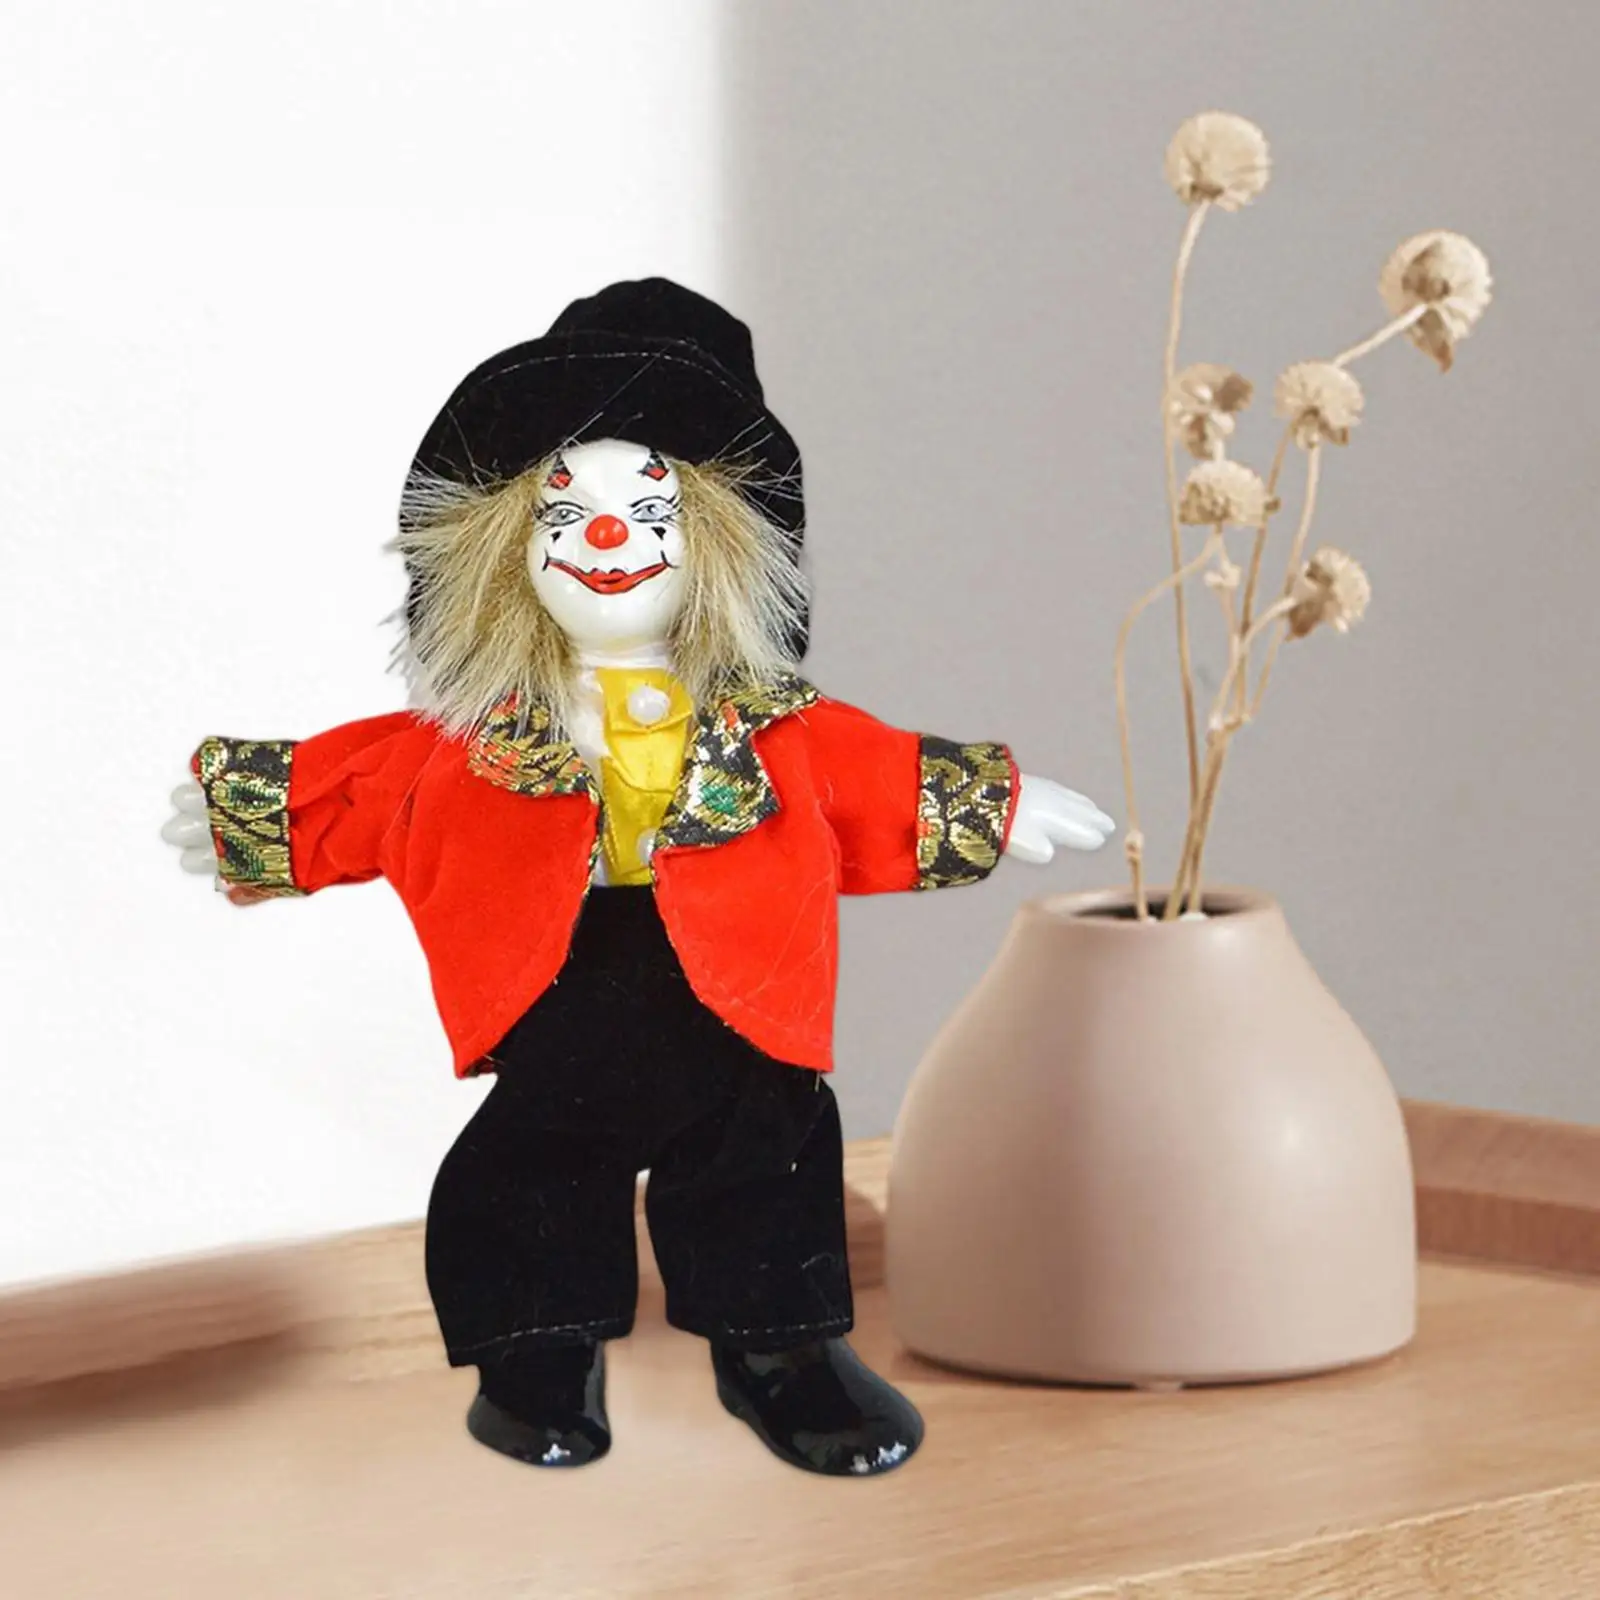 18cm Tall Clown Doll Figure Figurine Toy Table Desk Decor Movable for Desktop Bedroom Holiday Carnival Birthday Gifts